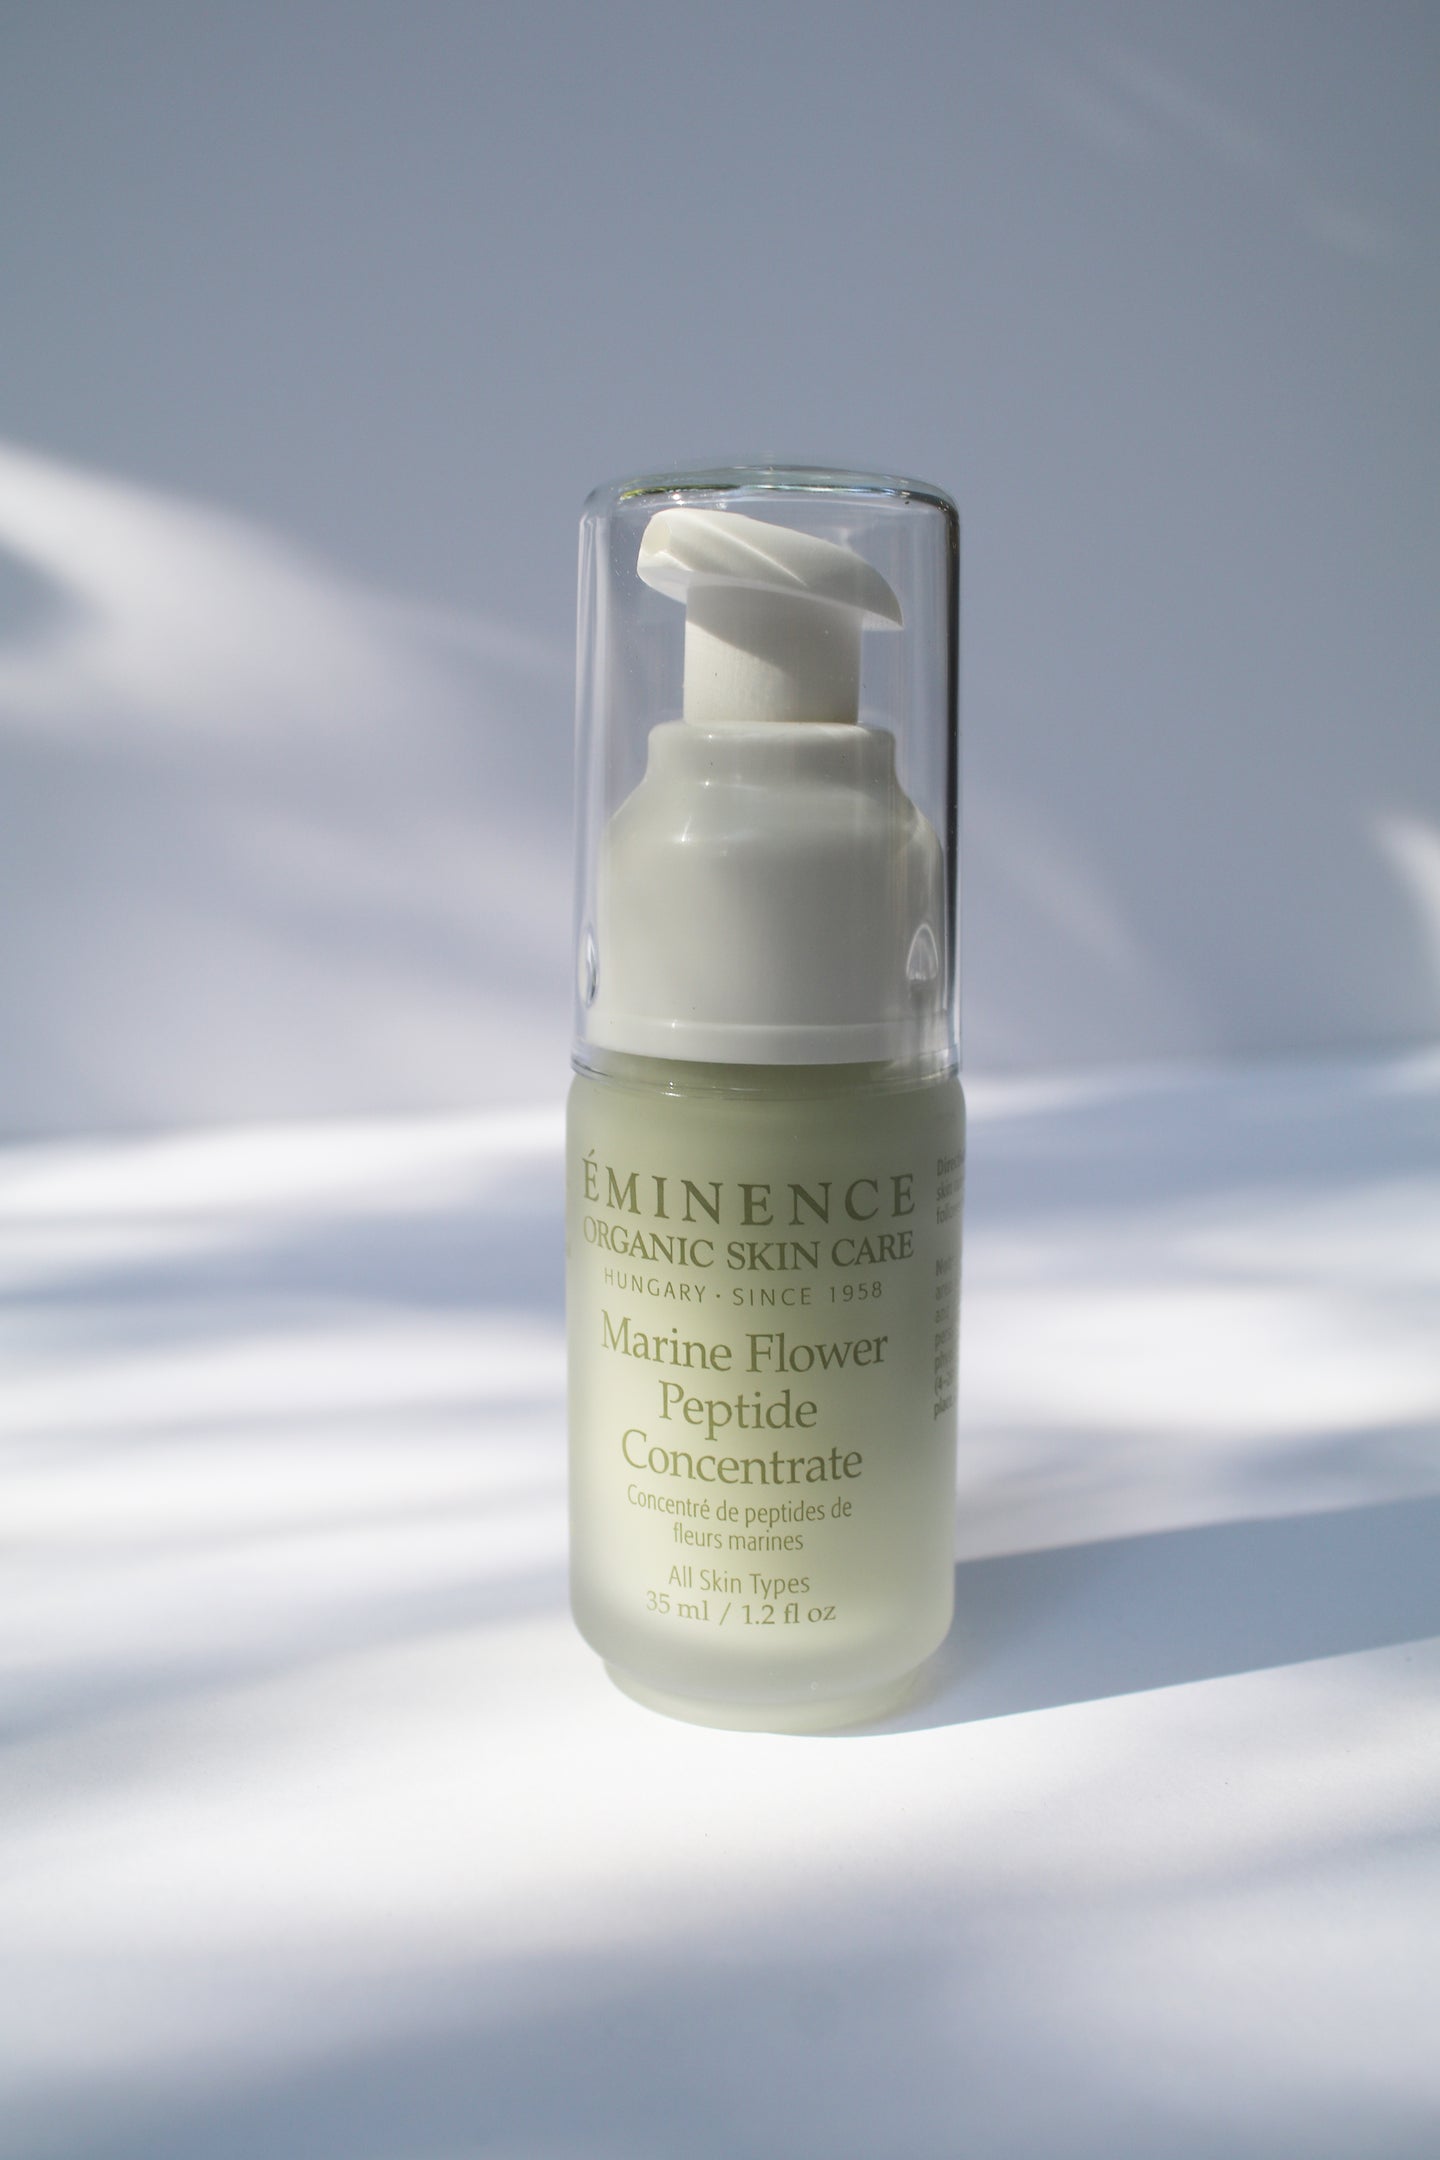 a bottle of marine flower peptide concentrate by Eminence